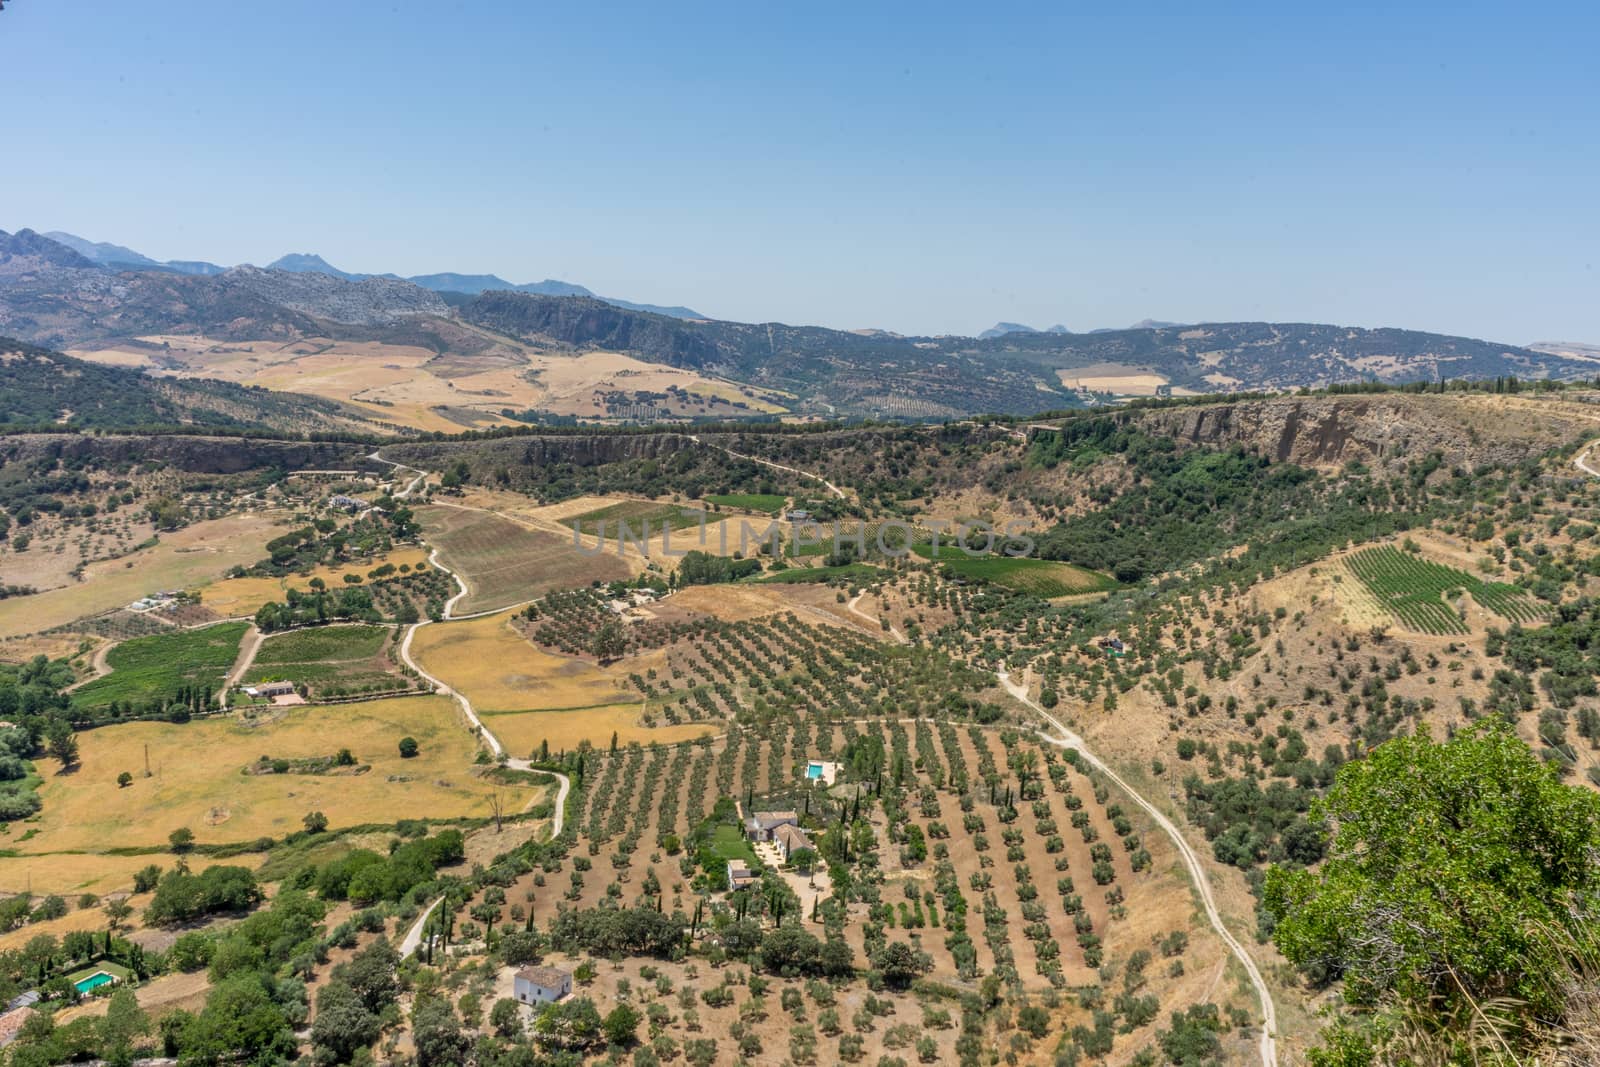 Greenery, Mountains, Farms and Fields on the outskirts of Ronda Spain, Europe on a hot summer day with clear blue skies